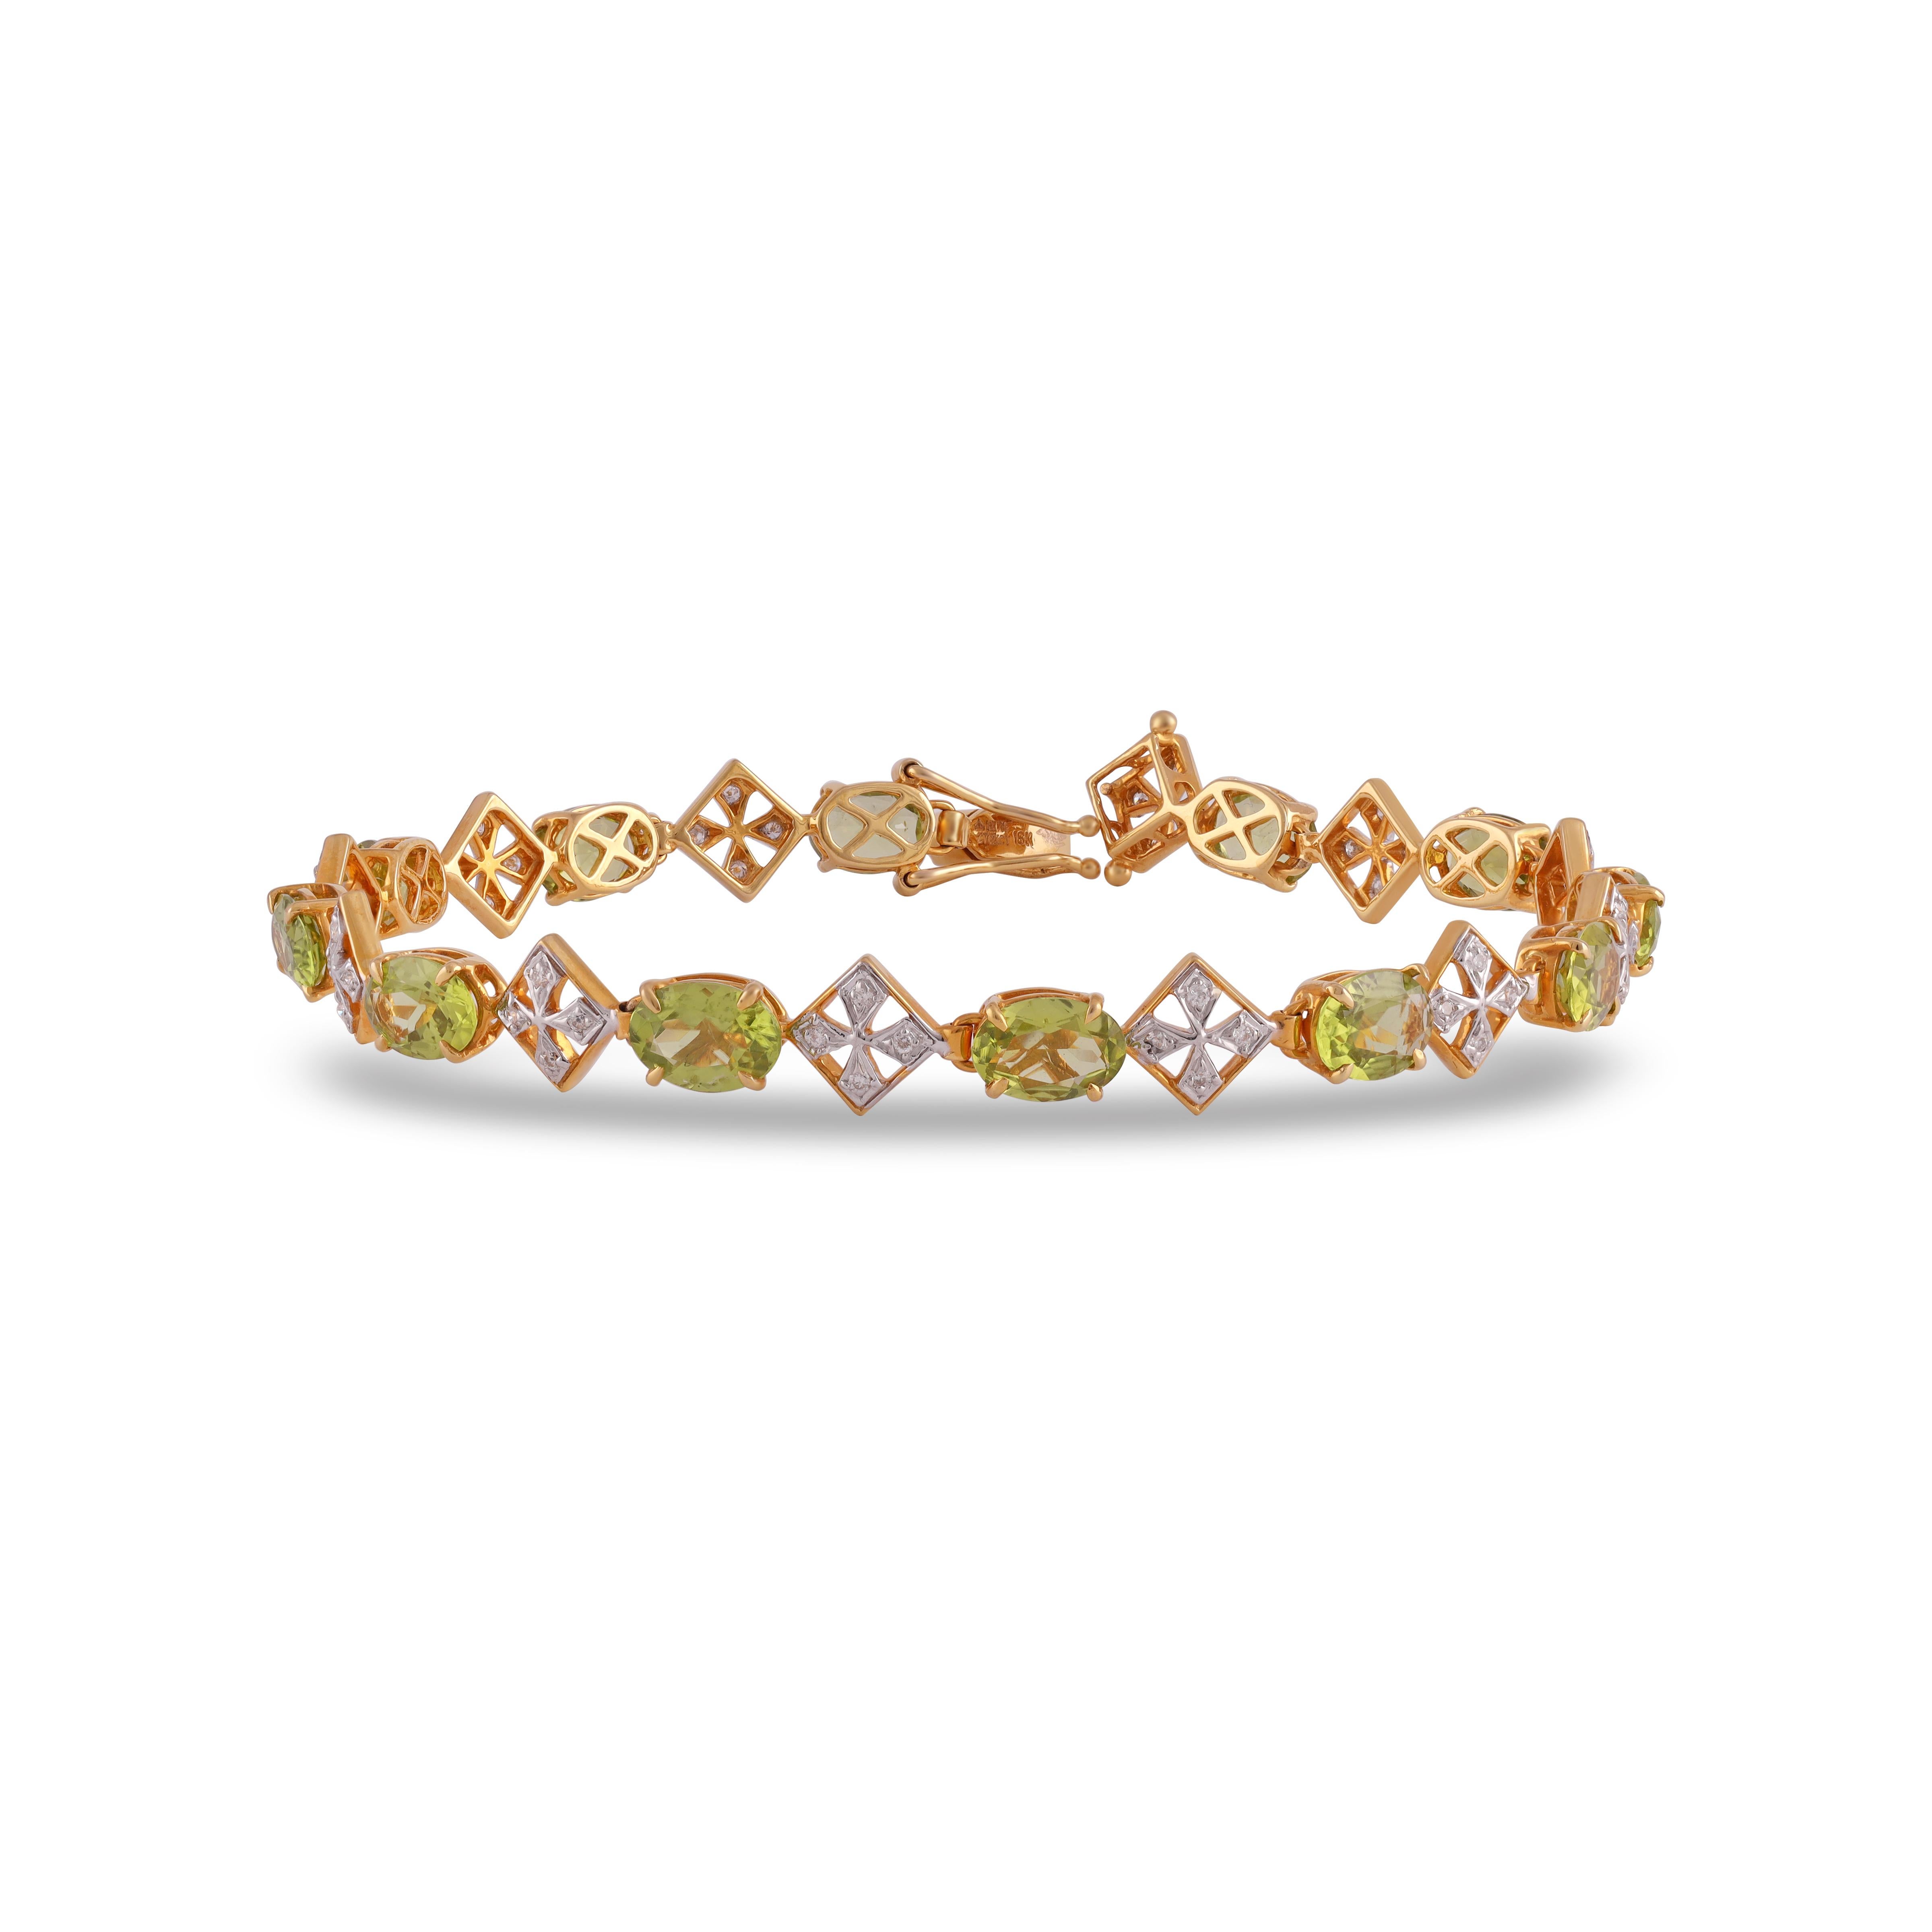 7.73 Carat Peridot & Diamond Bracelet  in 18k Gold

This magnificent Oval shape Peridot Bracelet is incredulous. The solitaire Oval-shaped Oval-cut Peridot are beautifully with Diamond.



Details of the piece:
Peridot : 7.73 Carat
Diamond :